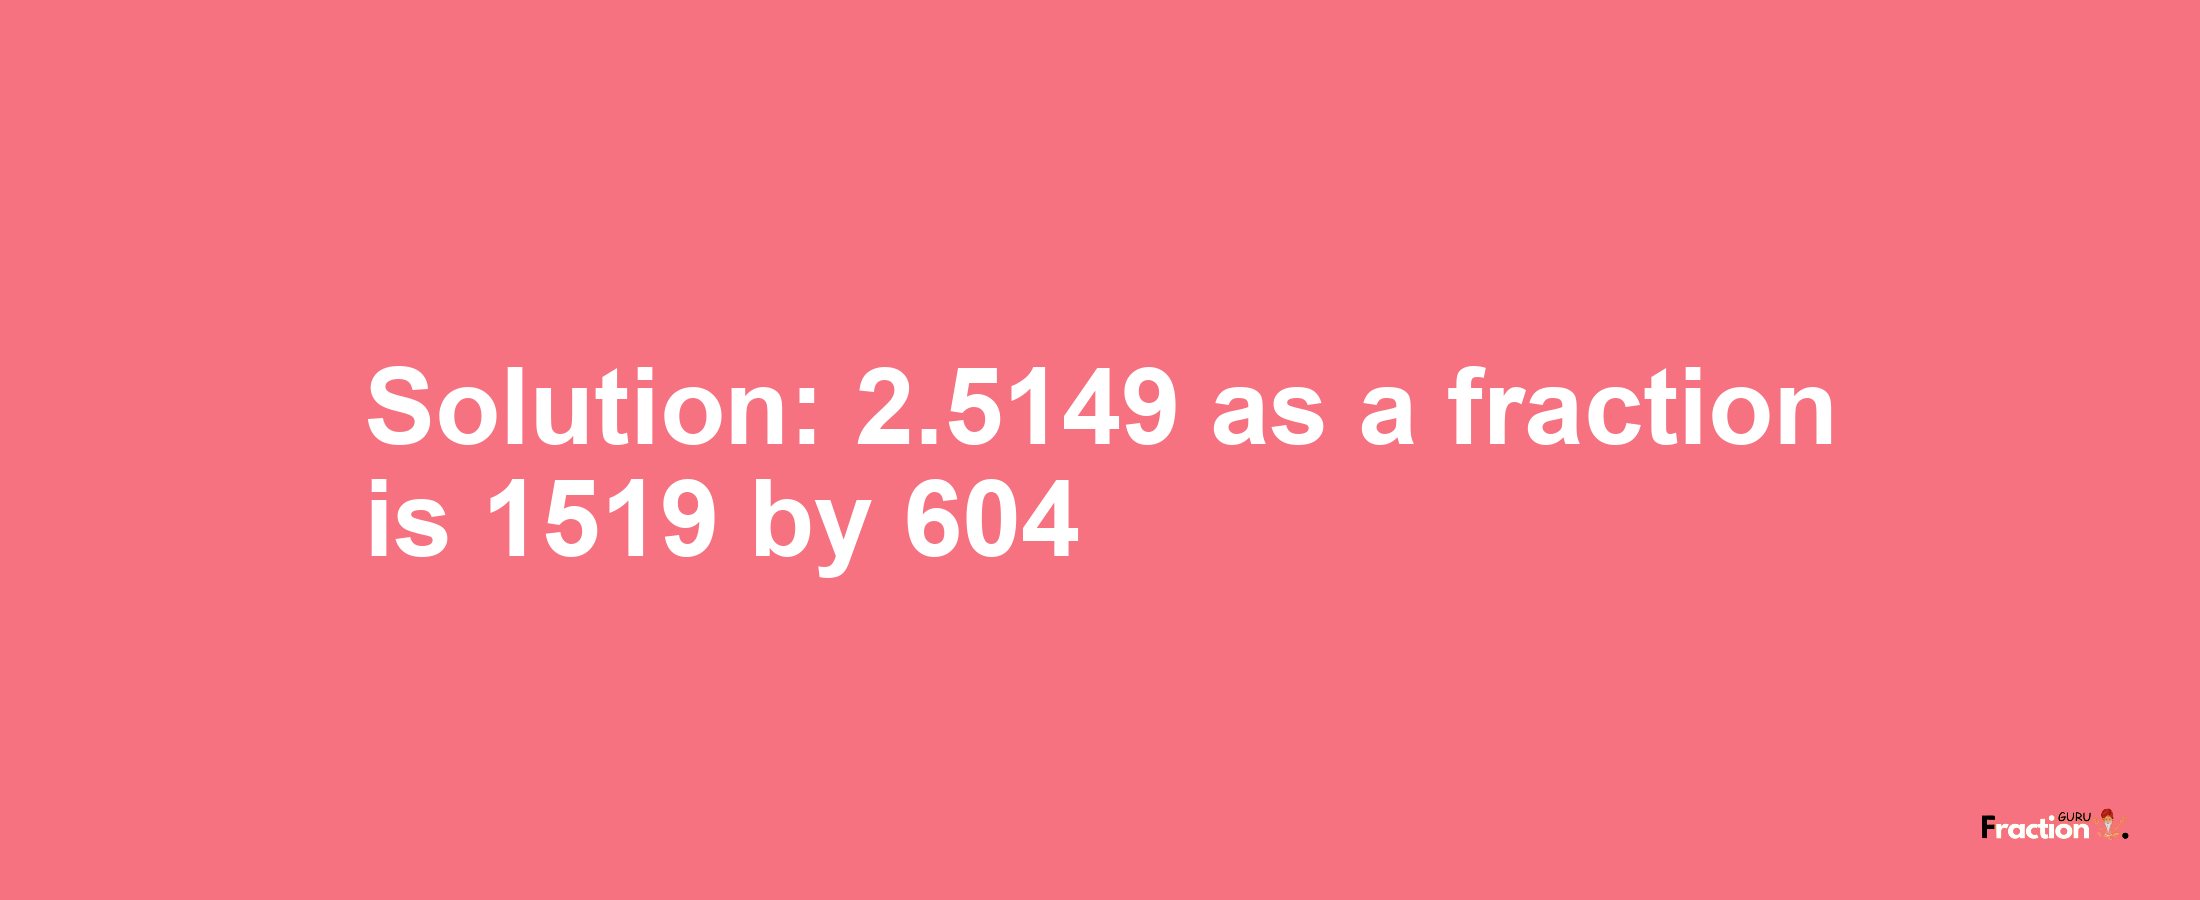 Solution:2.5149 as a fraction is 1519/604